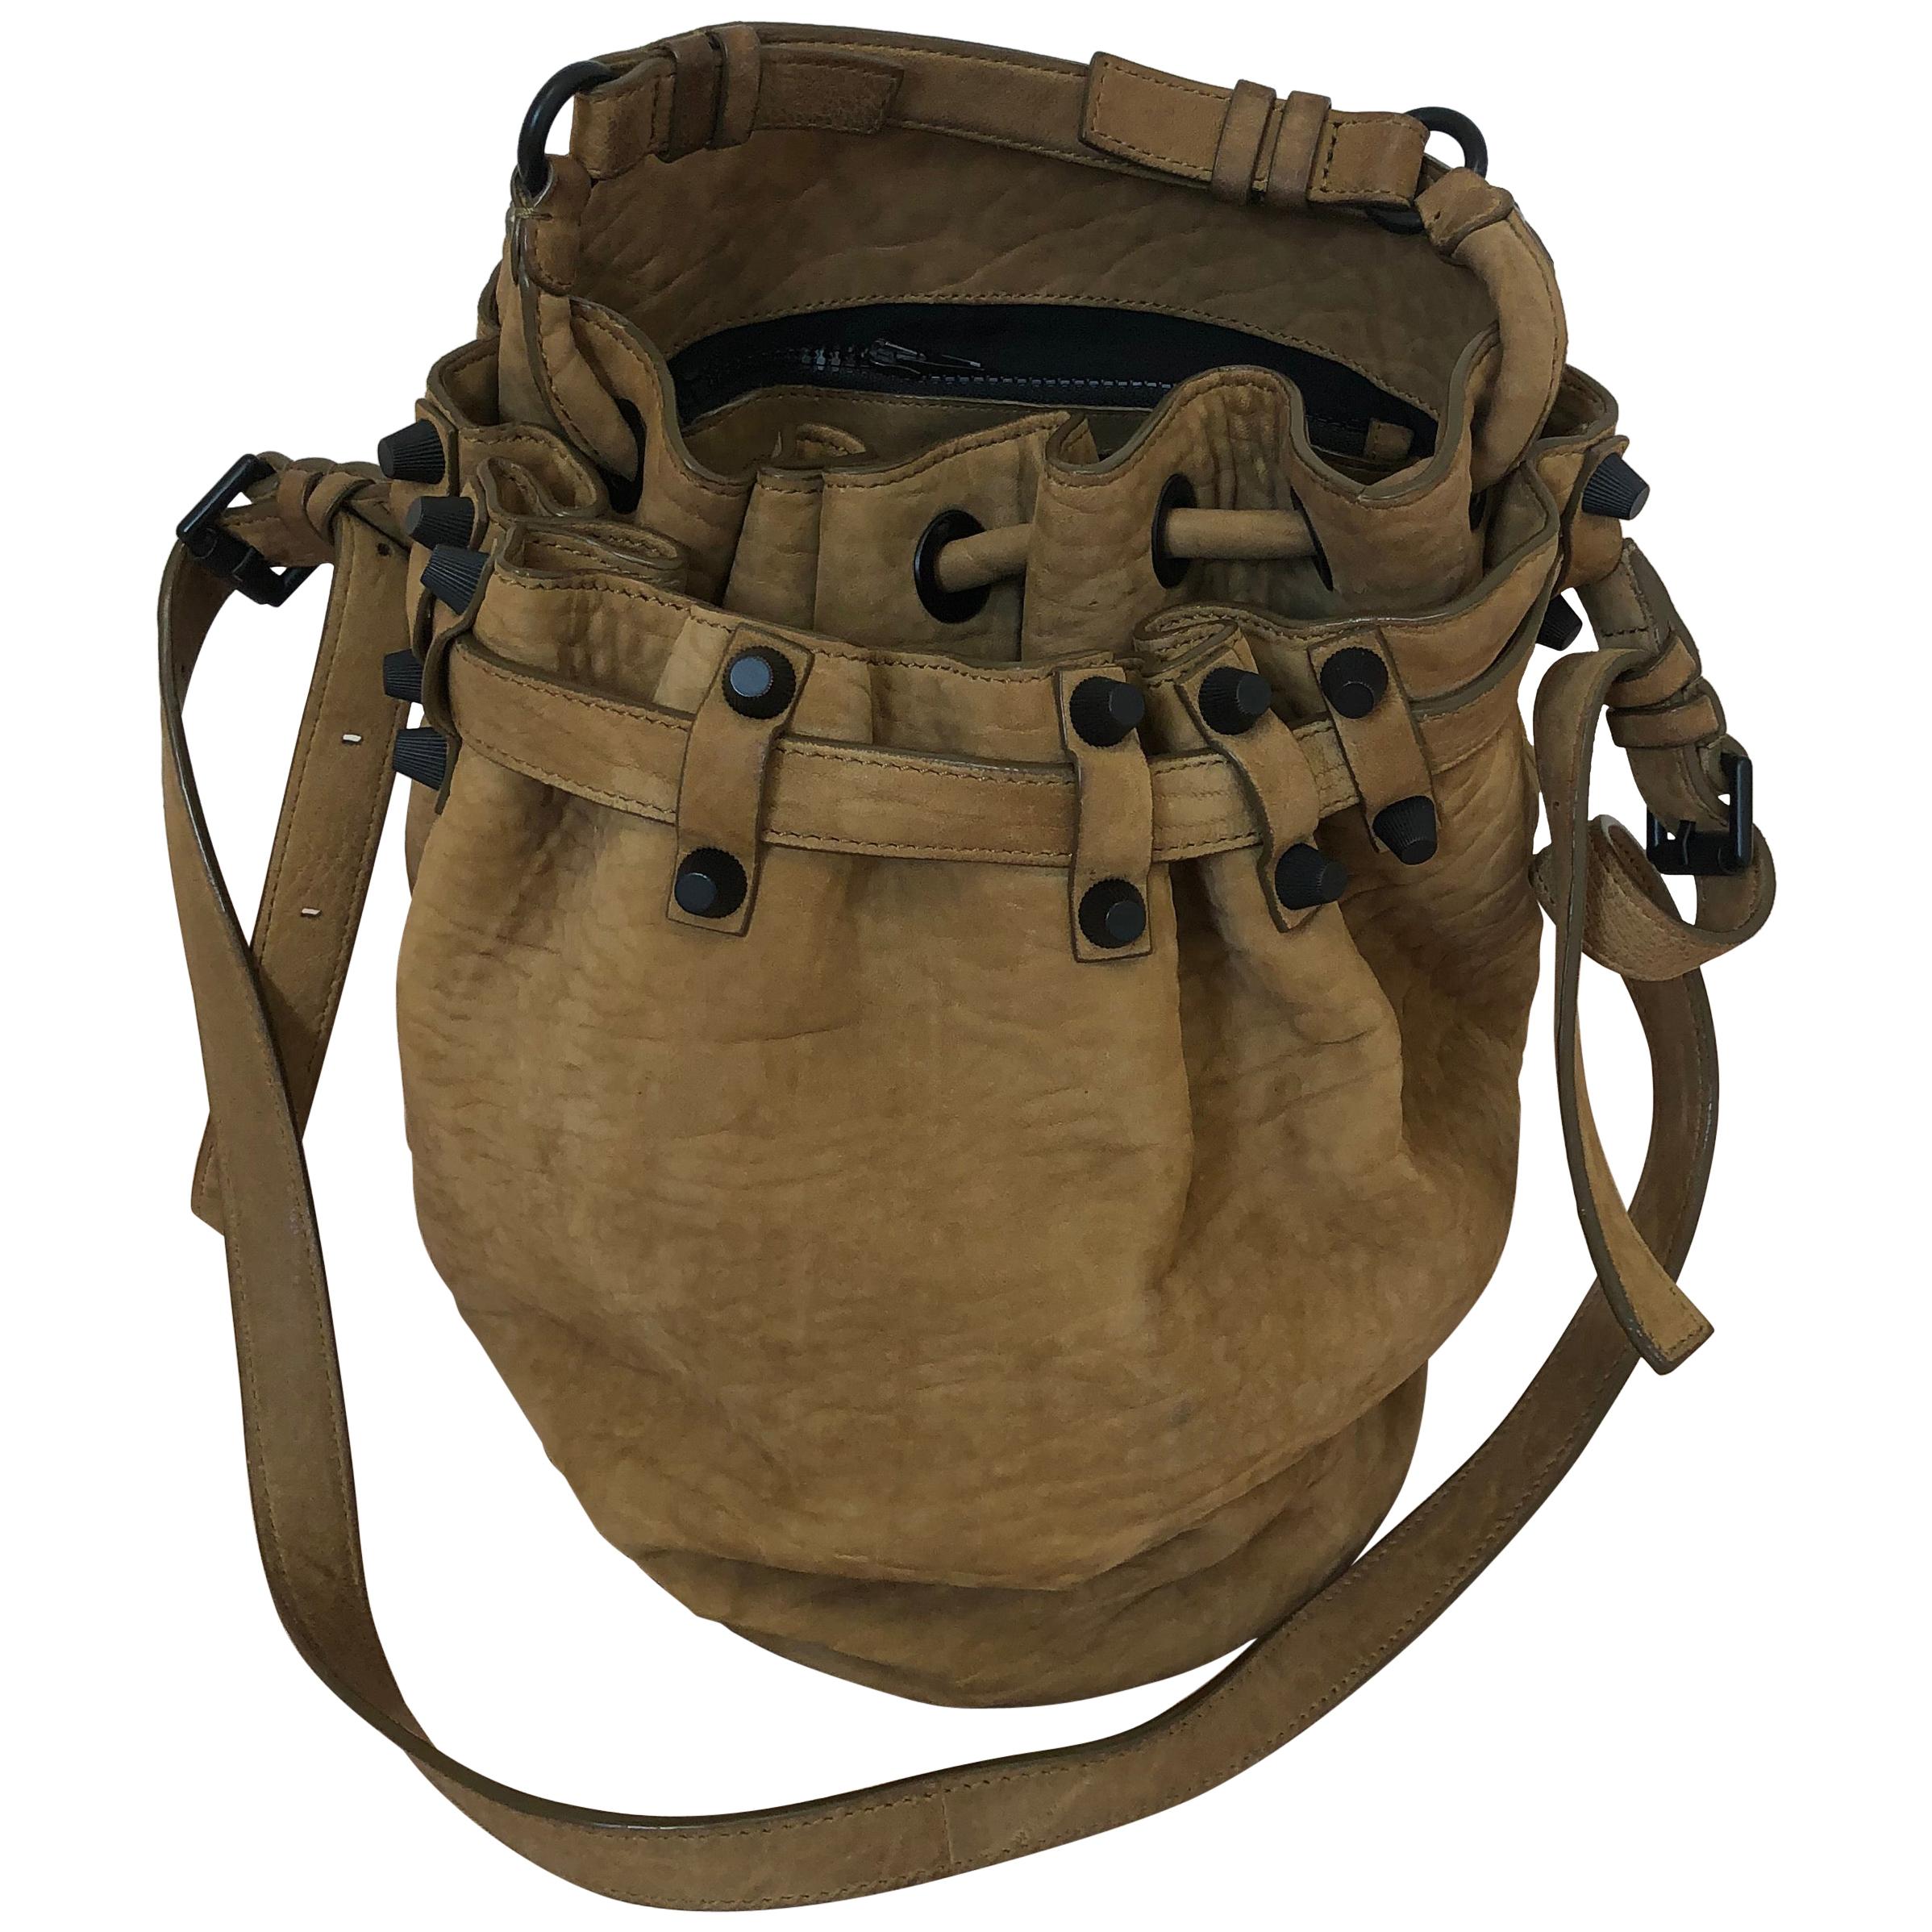 Alexander Wang "Diego" Suede Studded Bucket Bag in Taupe/Camel w/Dust Bag